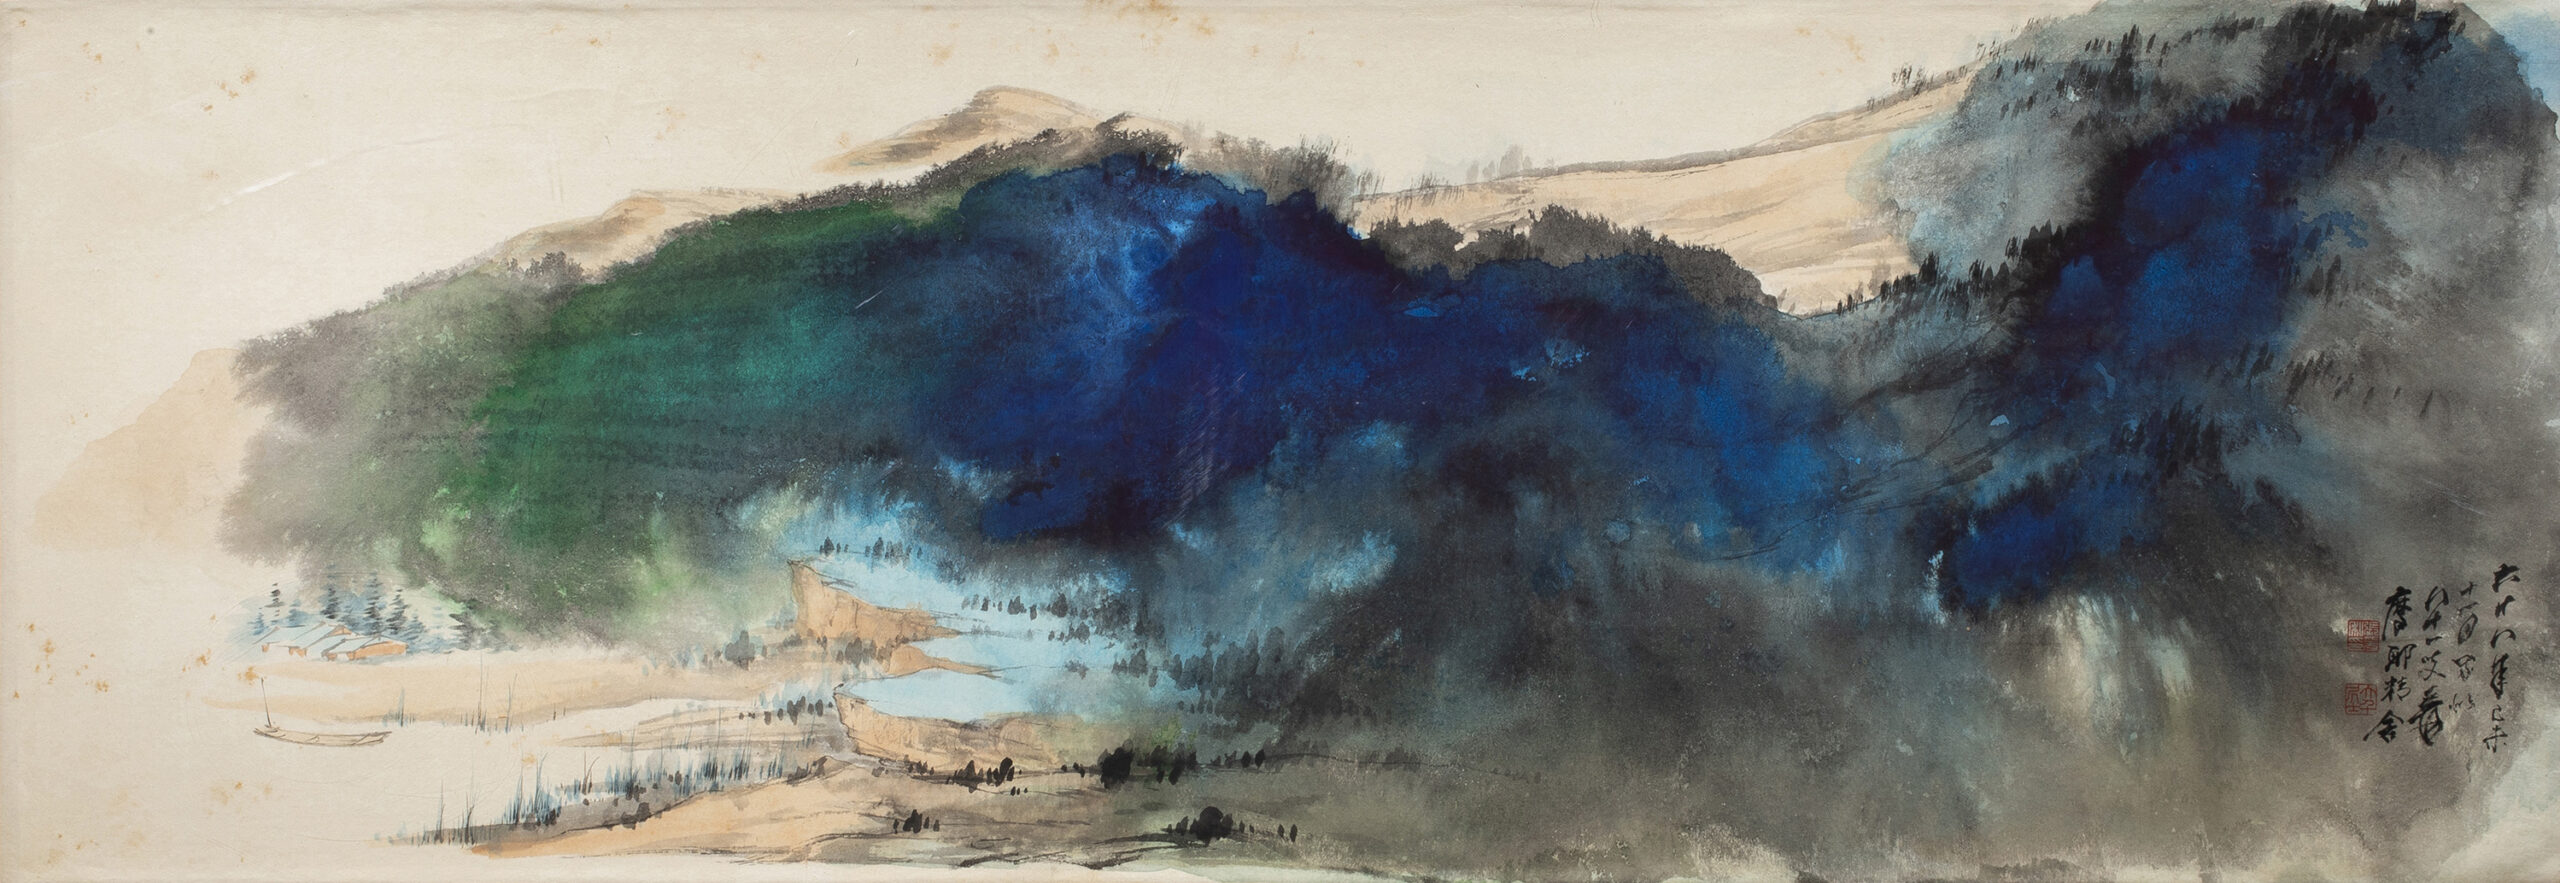 Attributed to Zhang Daqian, Splashed ink landscape, ink and color on paper, framed and glazed, inscribed, dated, and with two seals, 13″ x 37.25″.